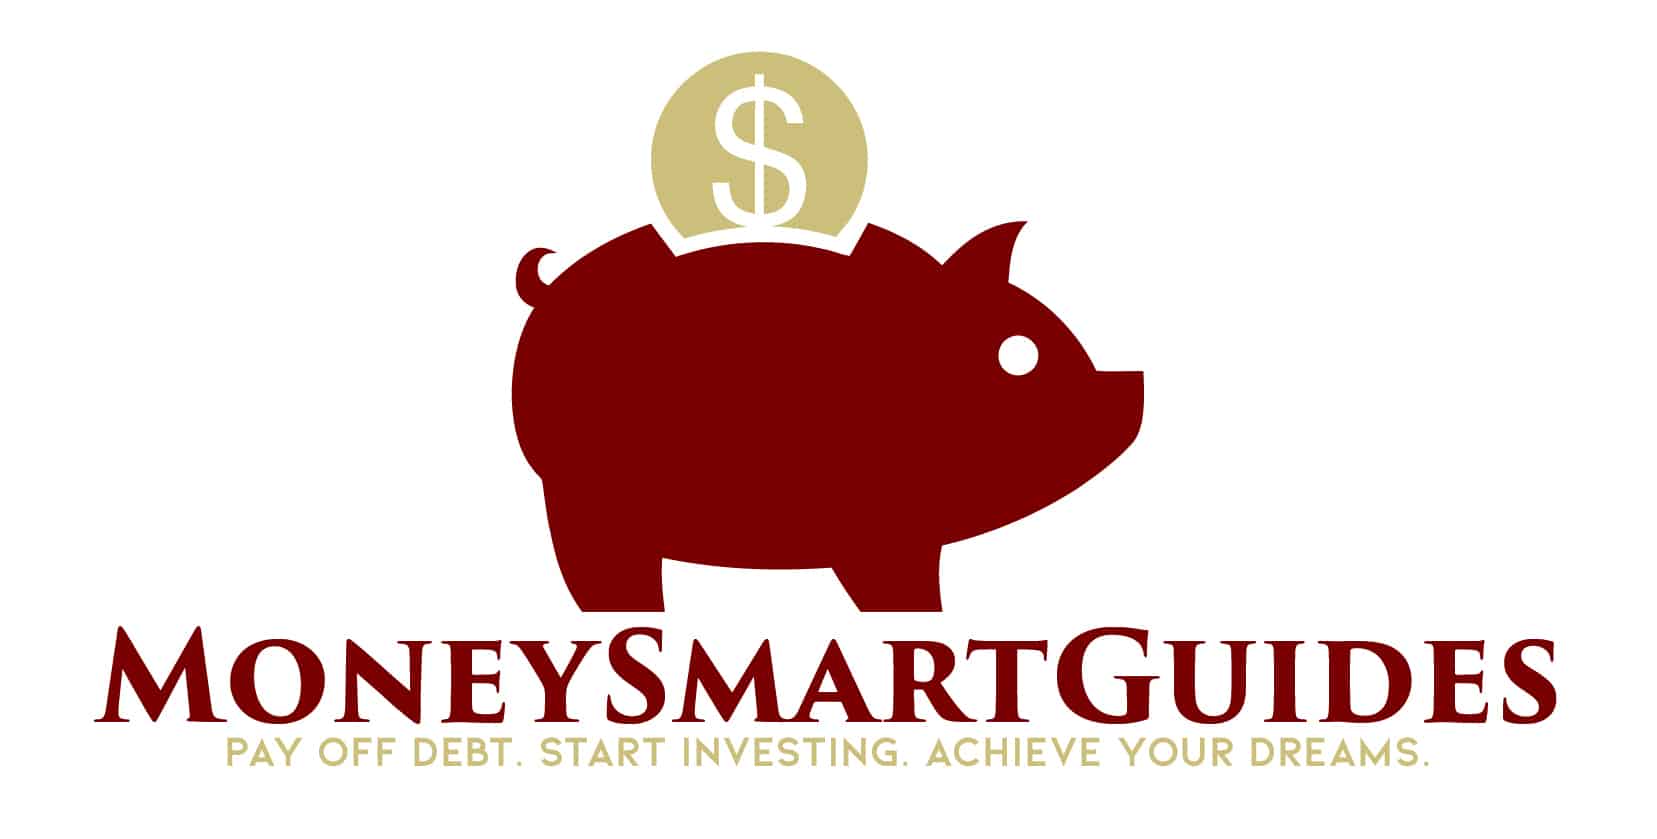 A logo featuring a red piggy bank with a dollar sign coin on top, representing financial saving and investment, accompanied by the text 